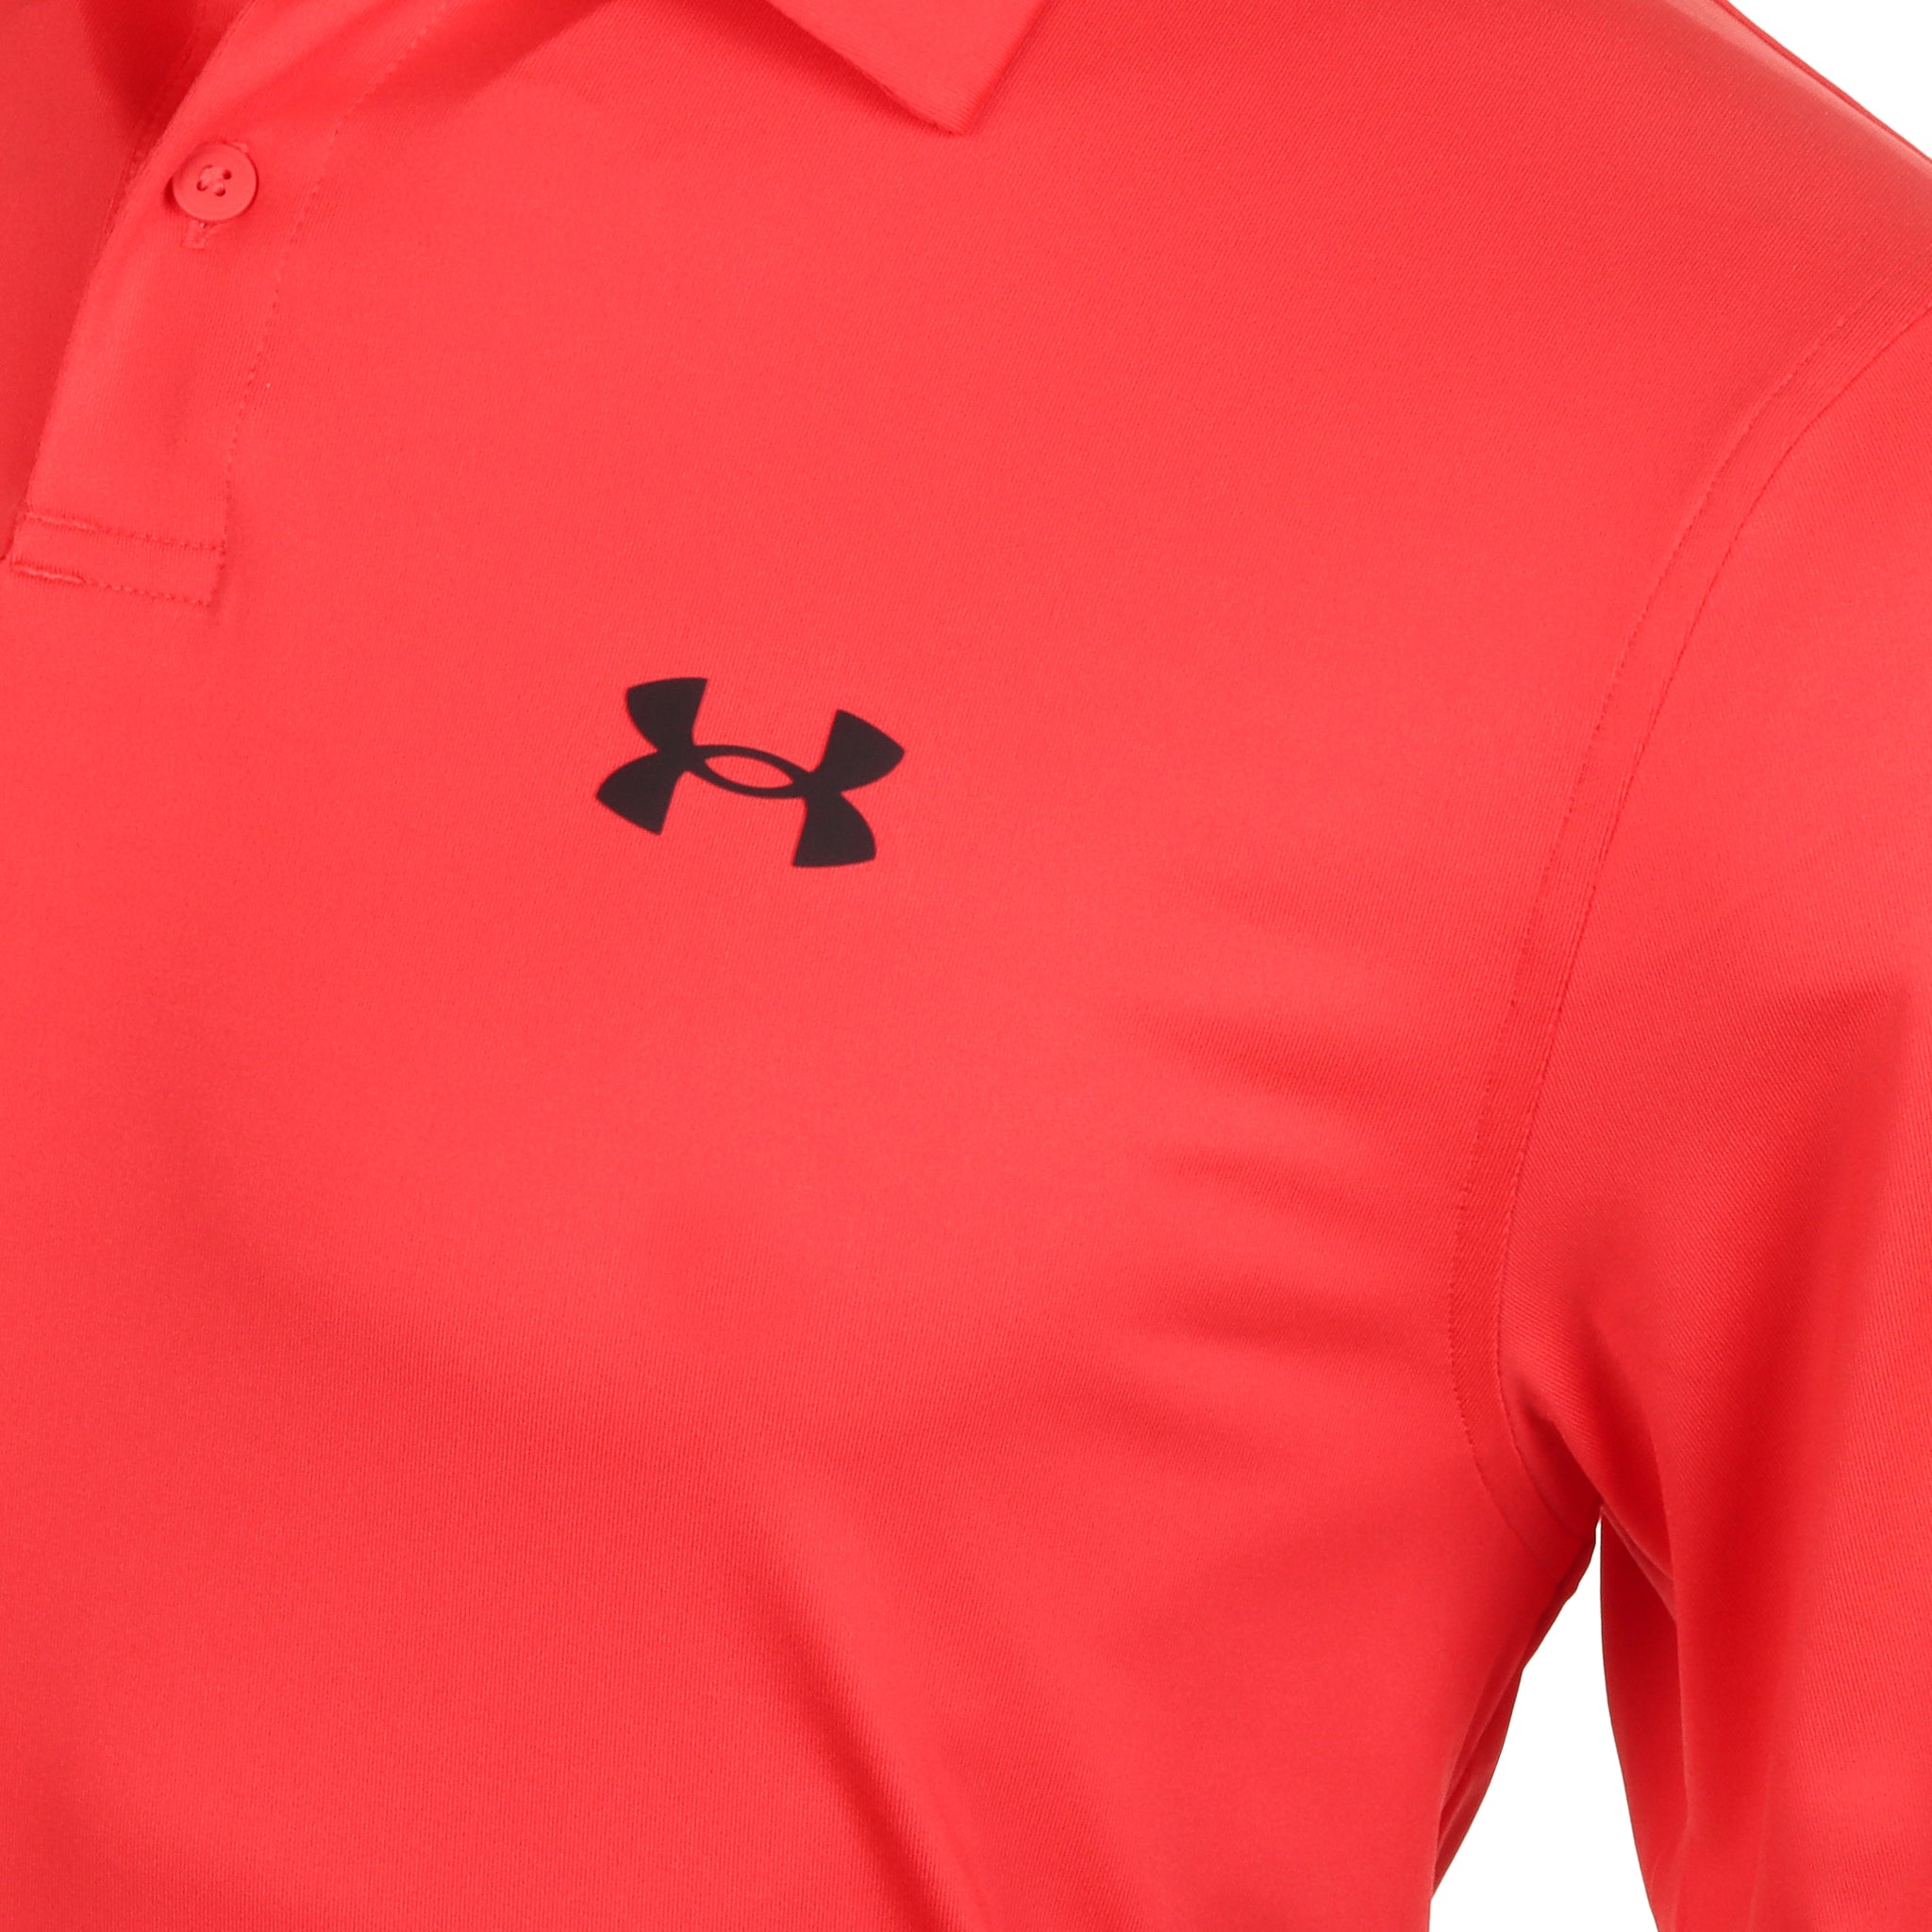 Under Armour Golf T2G Shirt 1383714 Red Solstice 814 & Function18